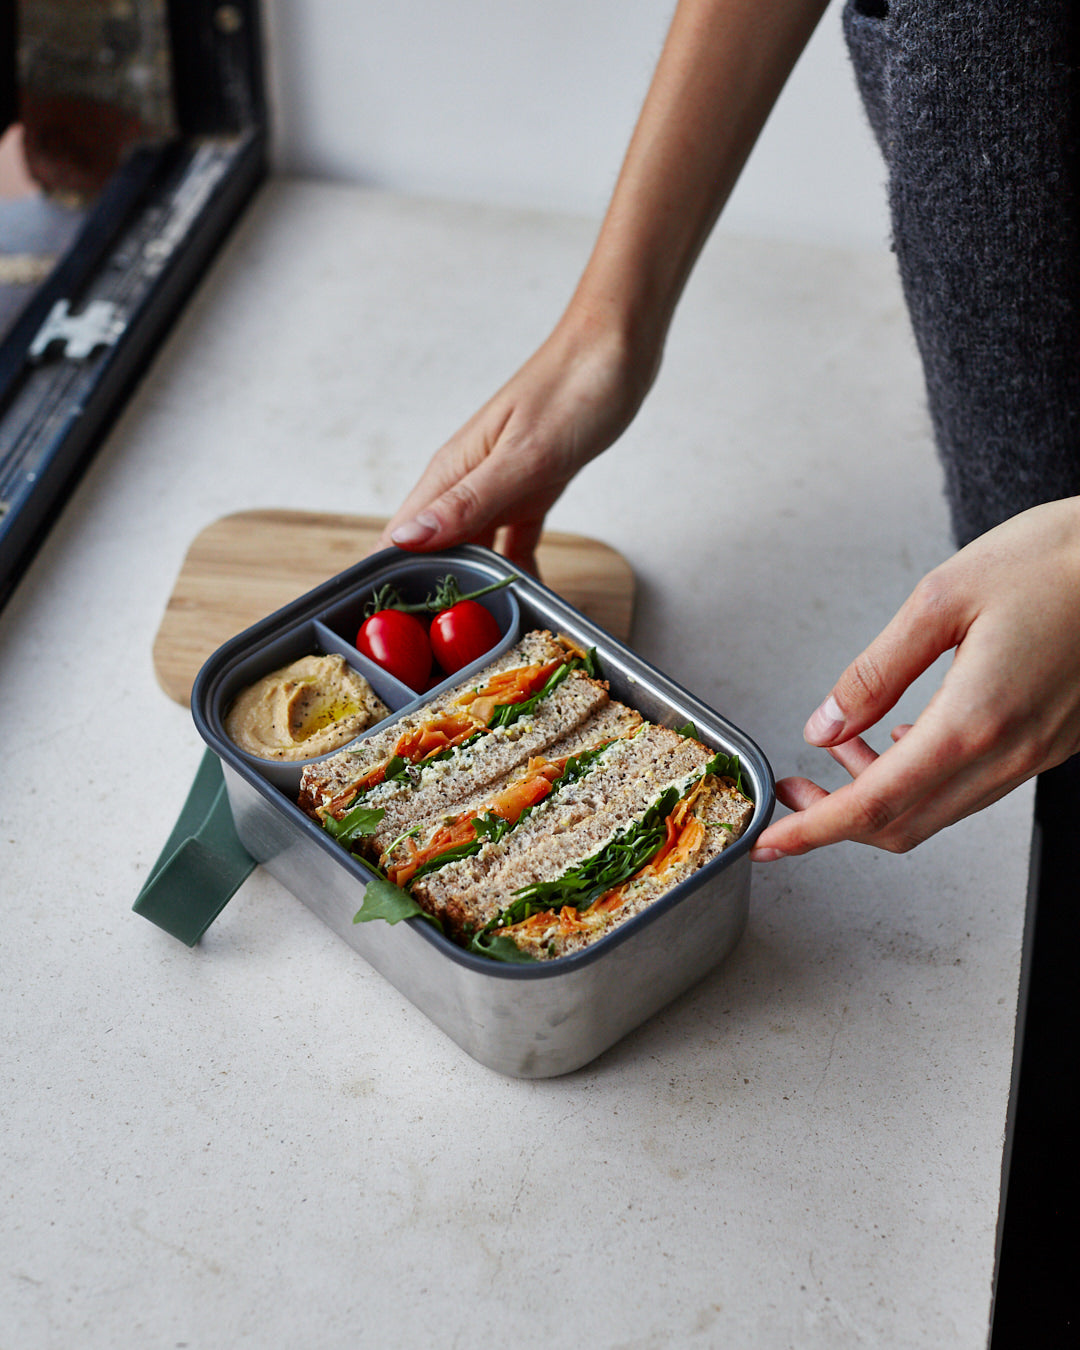 Black+Blum Stainless Steel Lunch Box - Olive